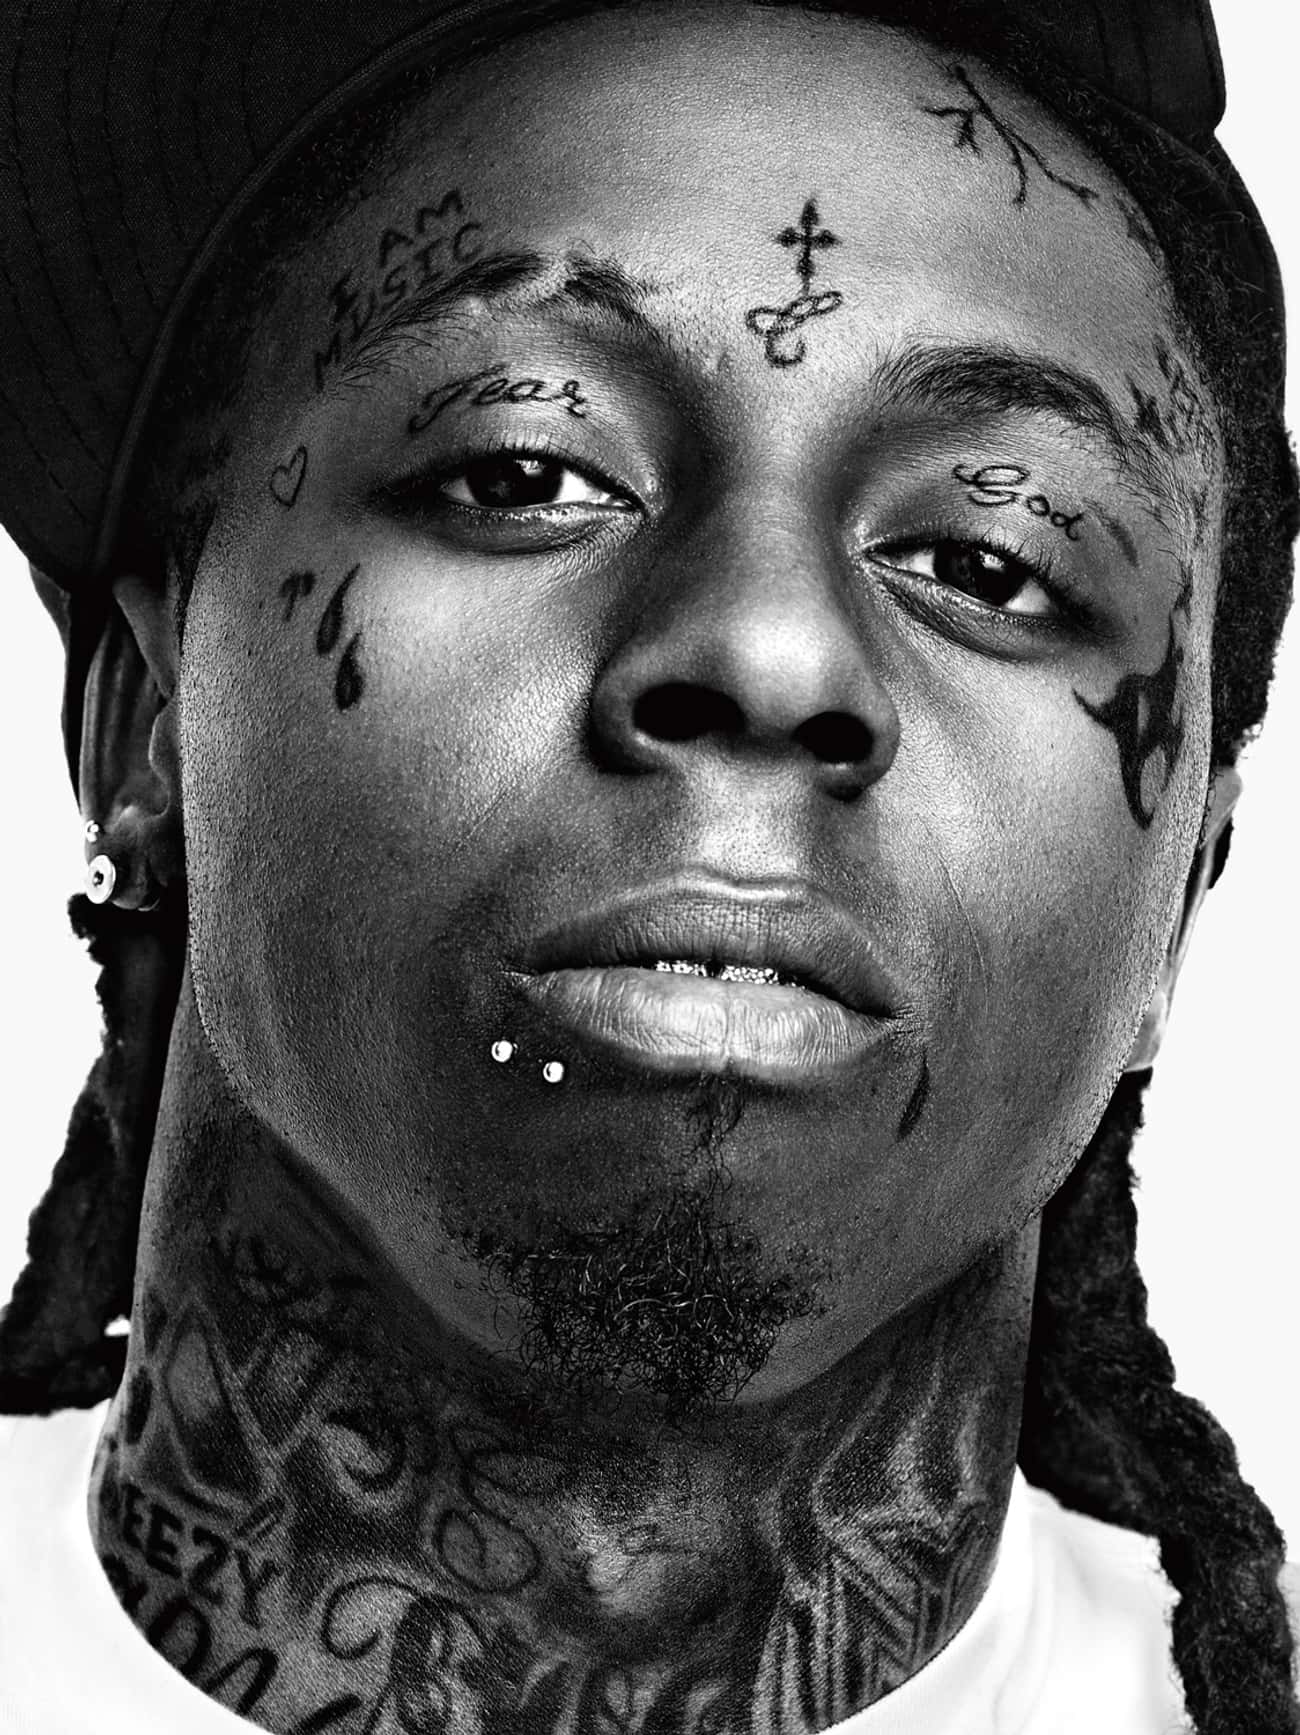 W and Weezy